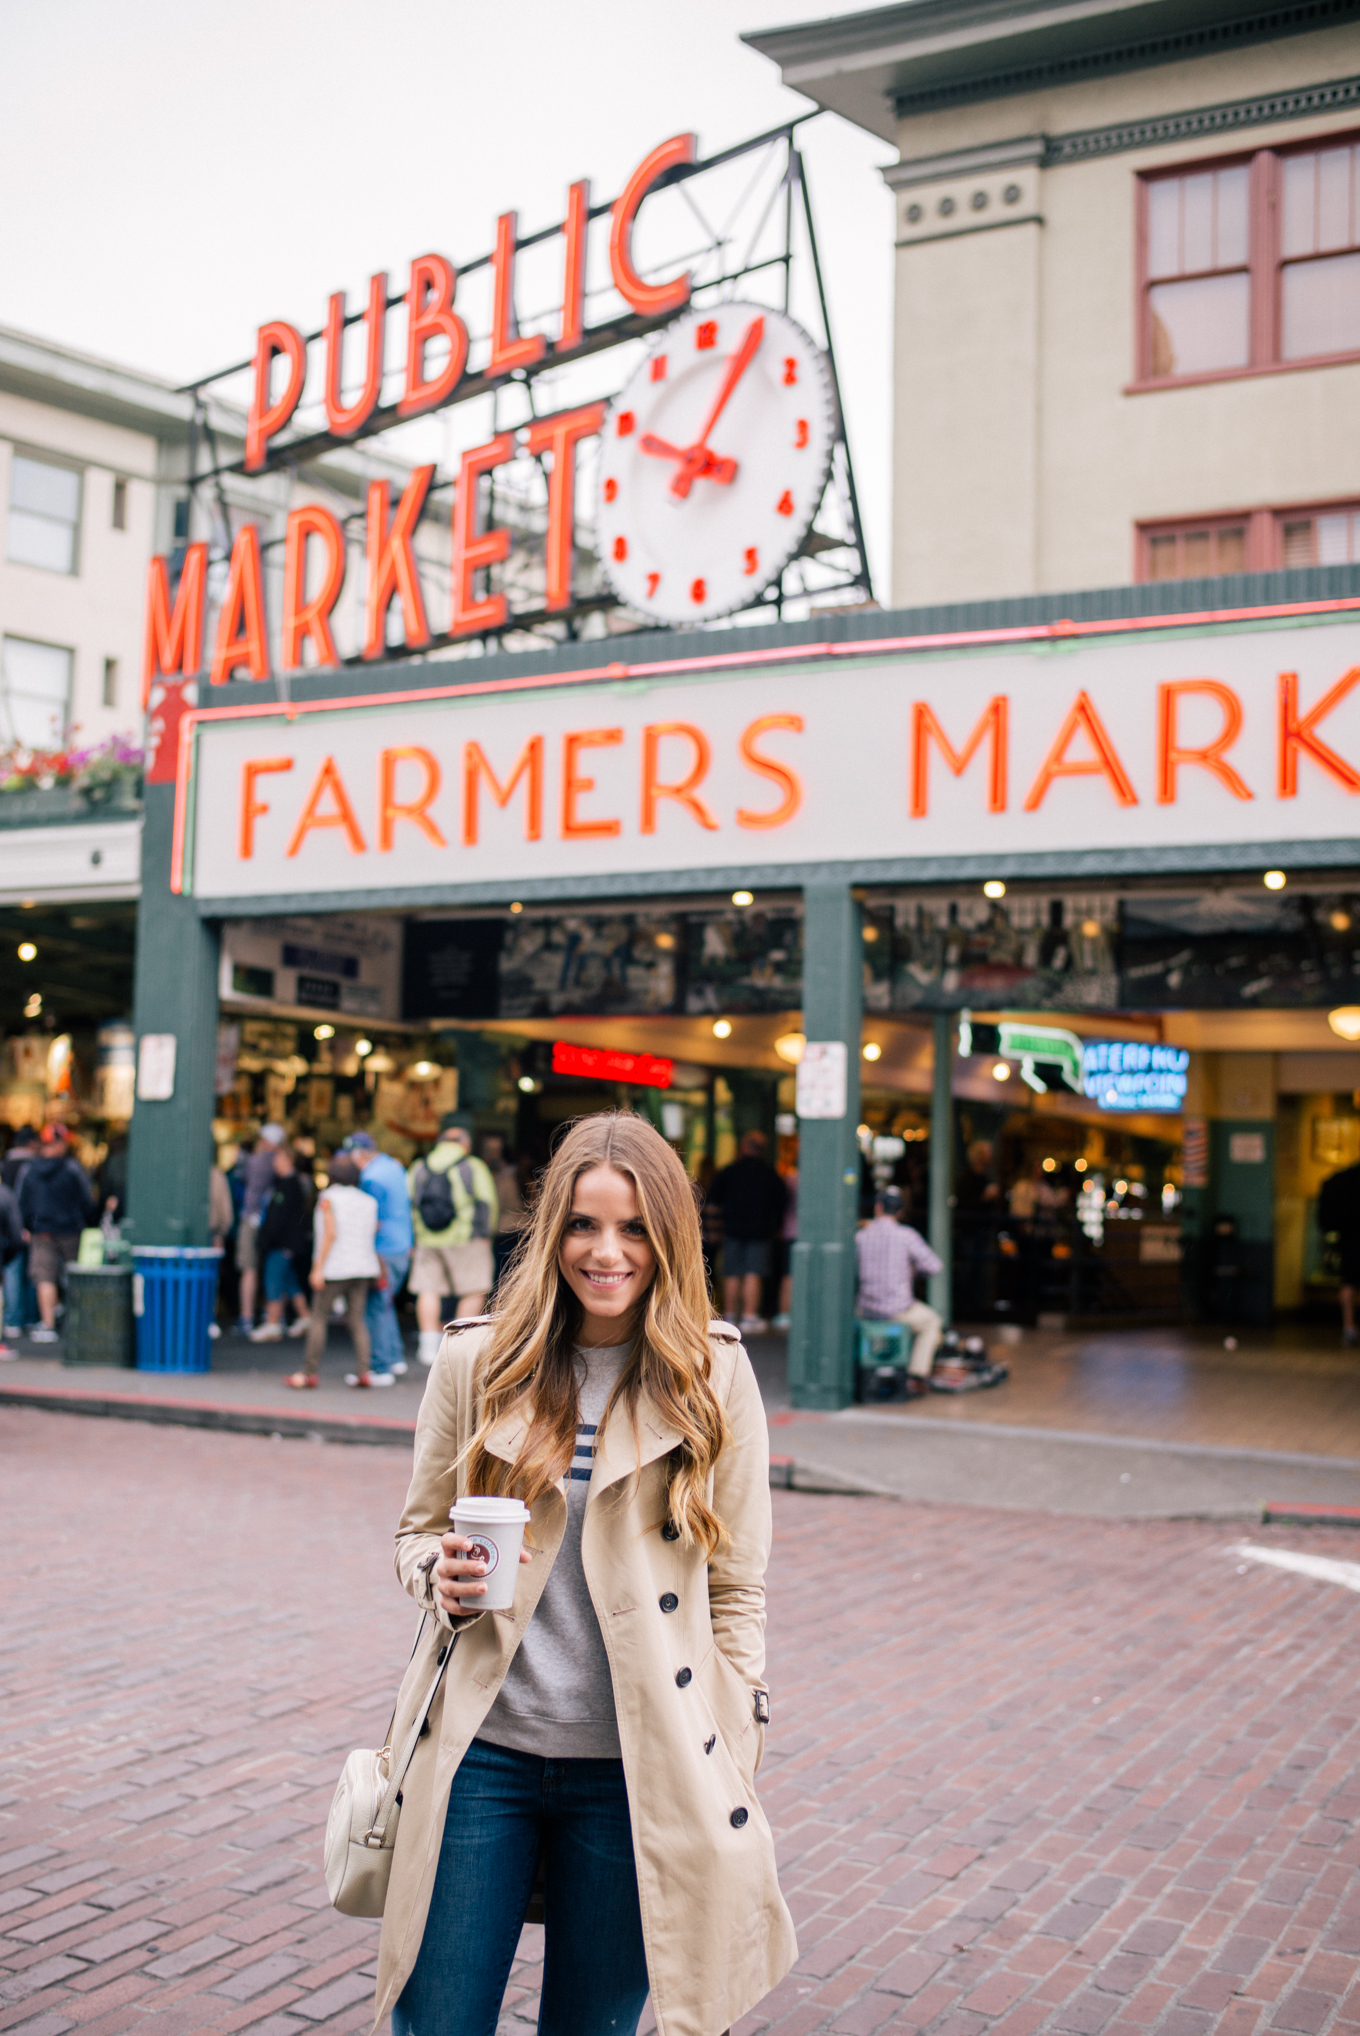 gmg-pike-place-seattle-1008655